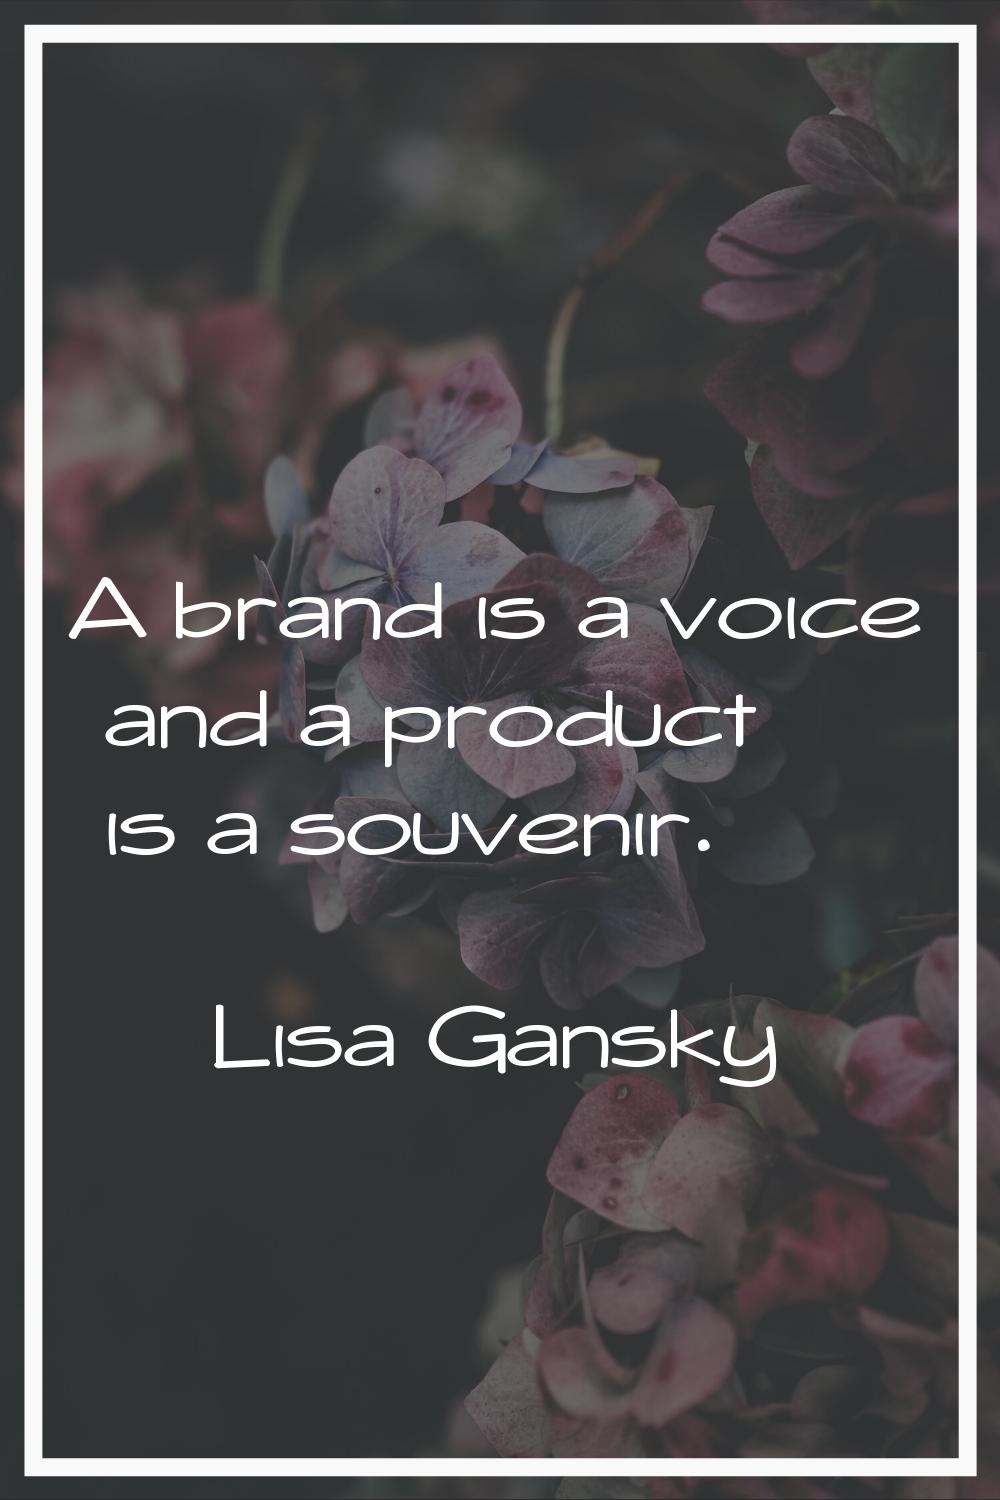 A brand is a voice and a product is a souvenir.